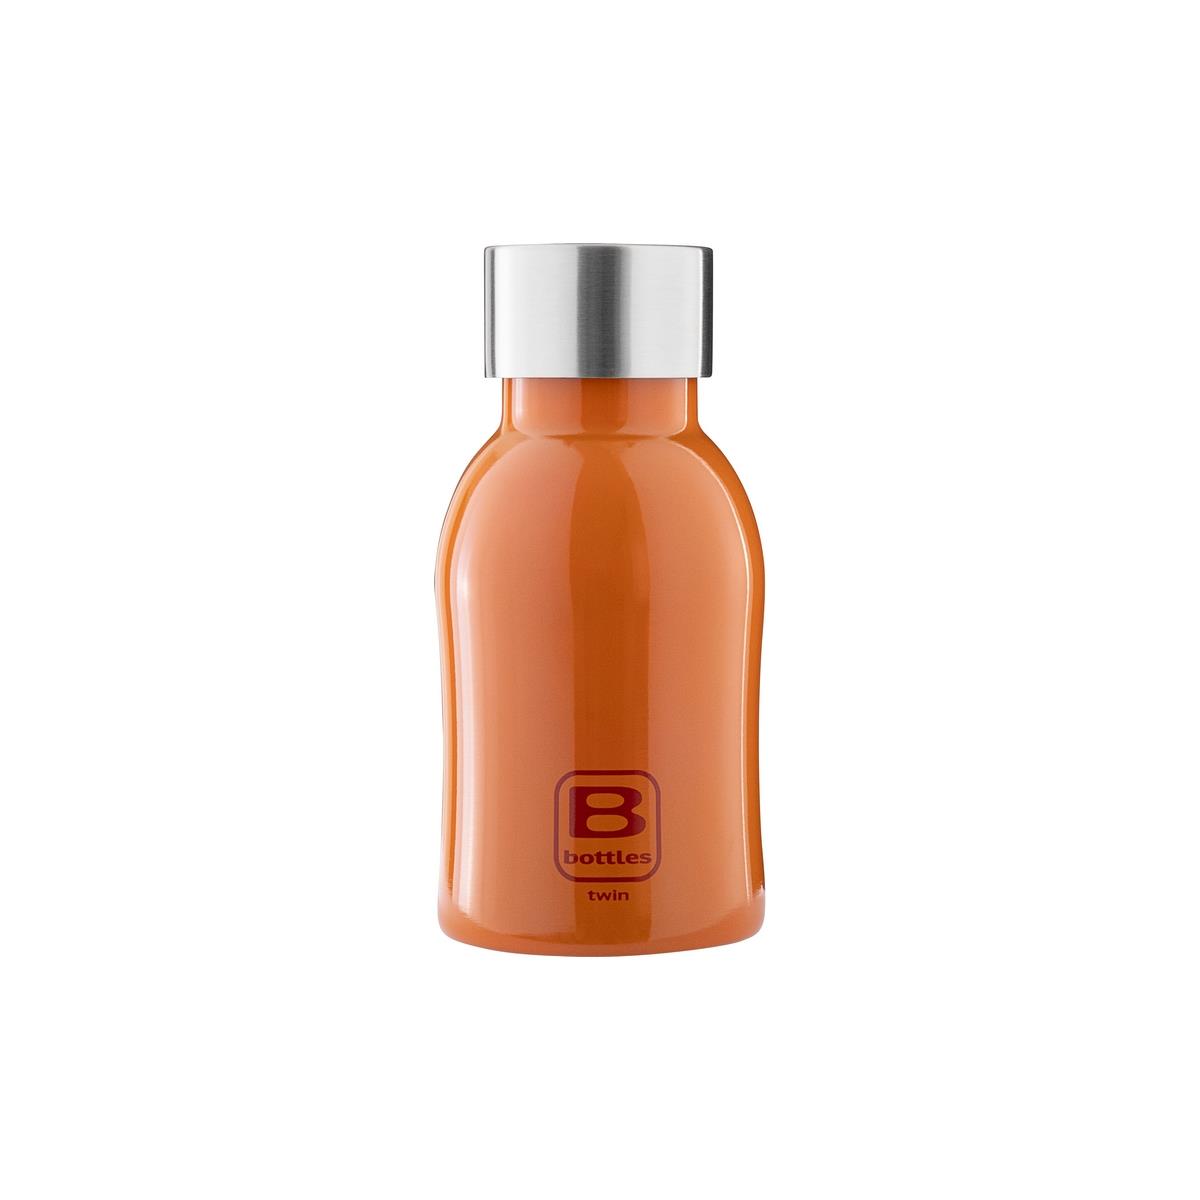 photo B Bottles Twin - Glossy Orange - 250 ml - Double wall thermal bottle in 18/10 stainless steel